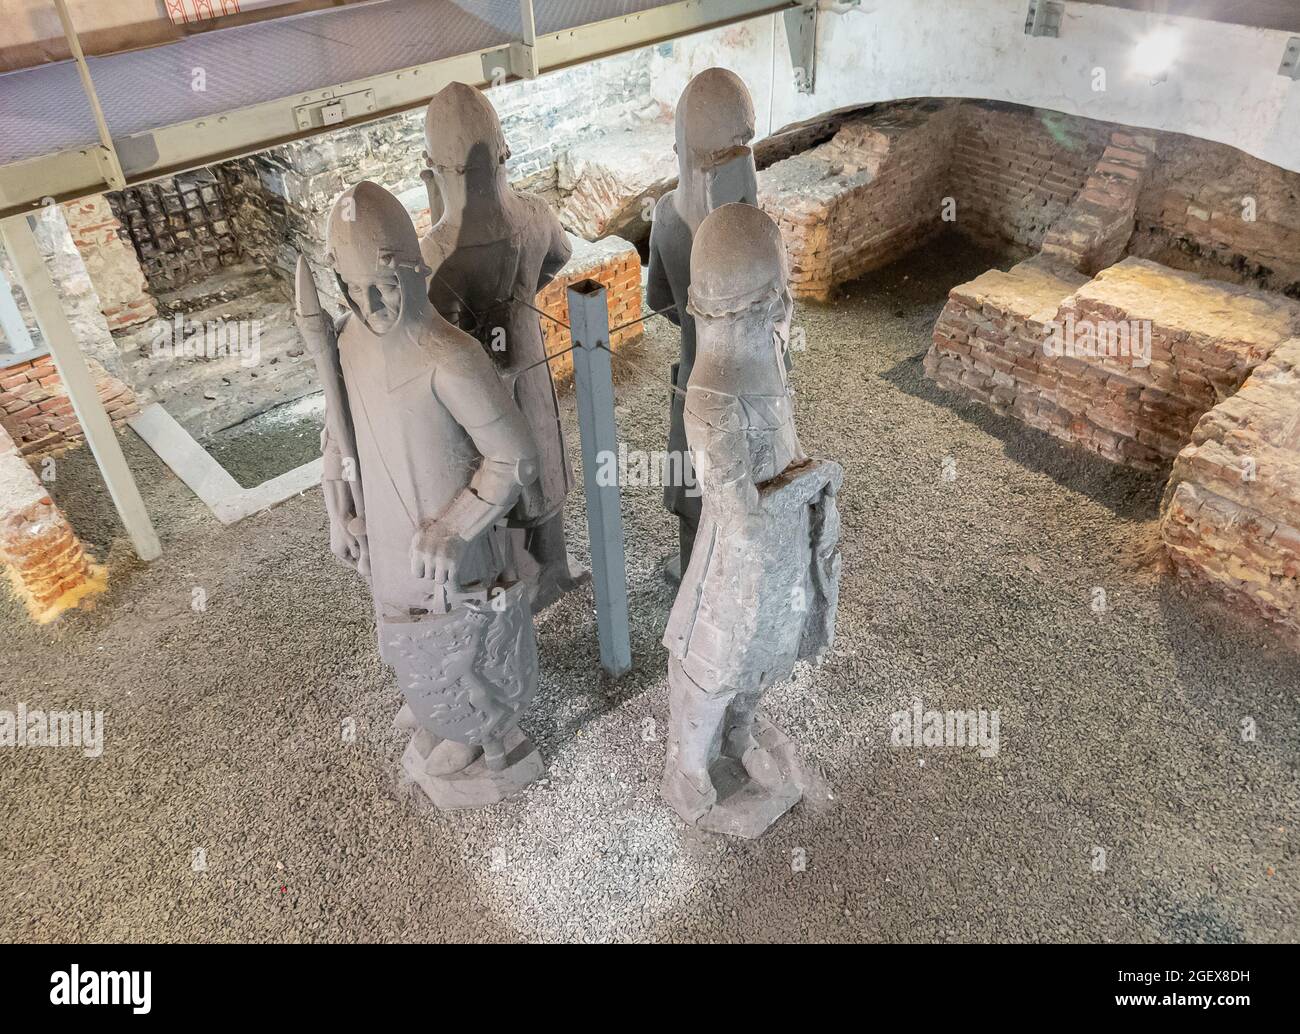 Gent, Flanders, Belgium - July 30, 2021: Gray stone statues of medieval soldiers at excavation site under Belfry. Old red brick fundaments are exposed Stock Photo